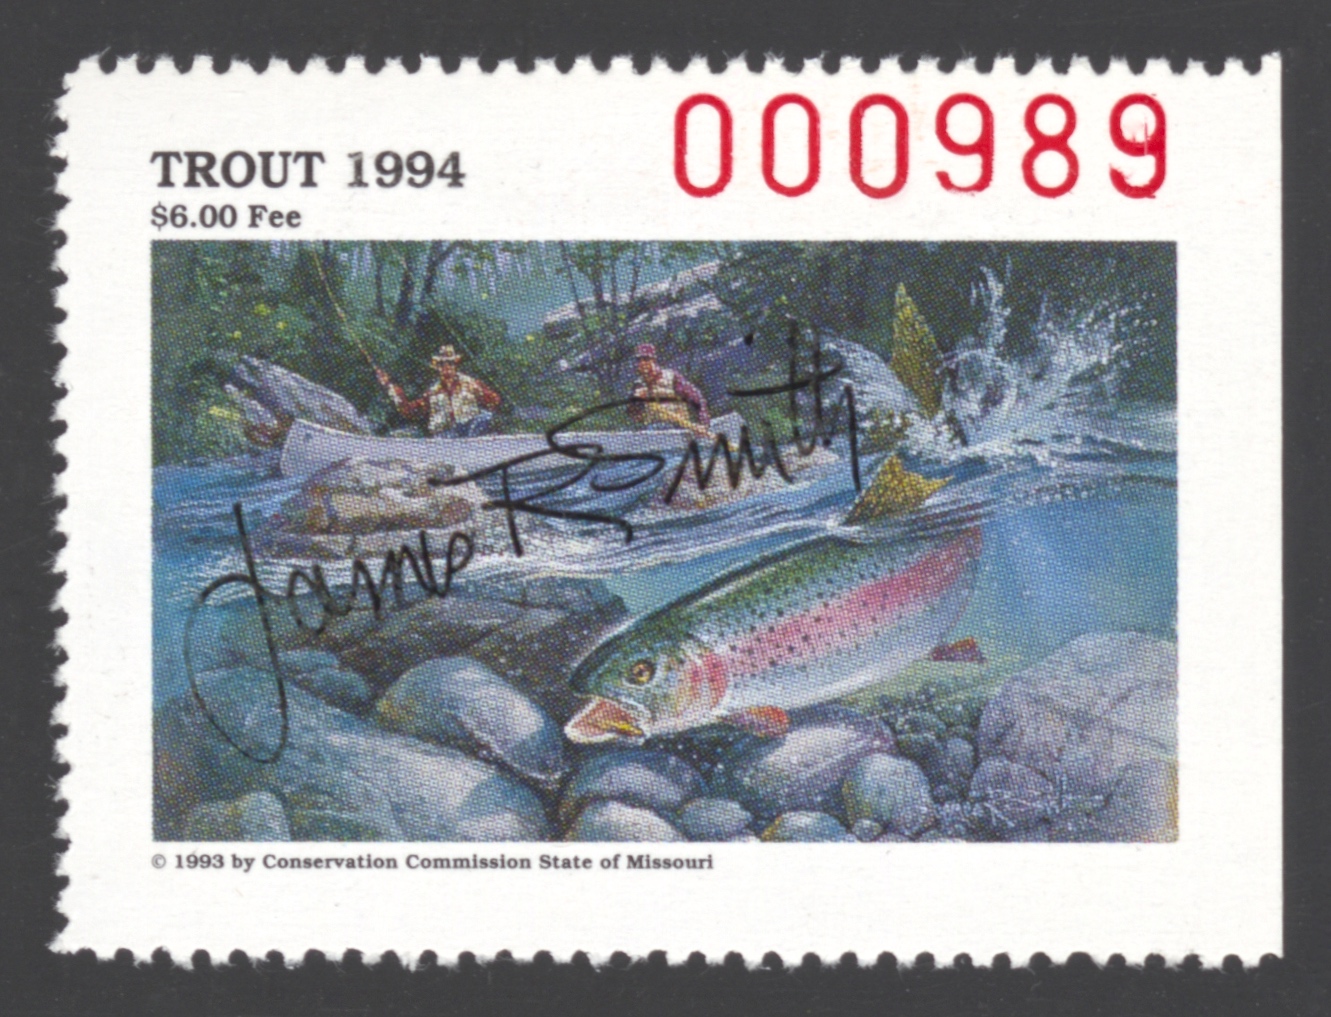 1994 Missouri Missouri Trout Stamp signed by James Smith